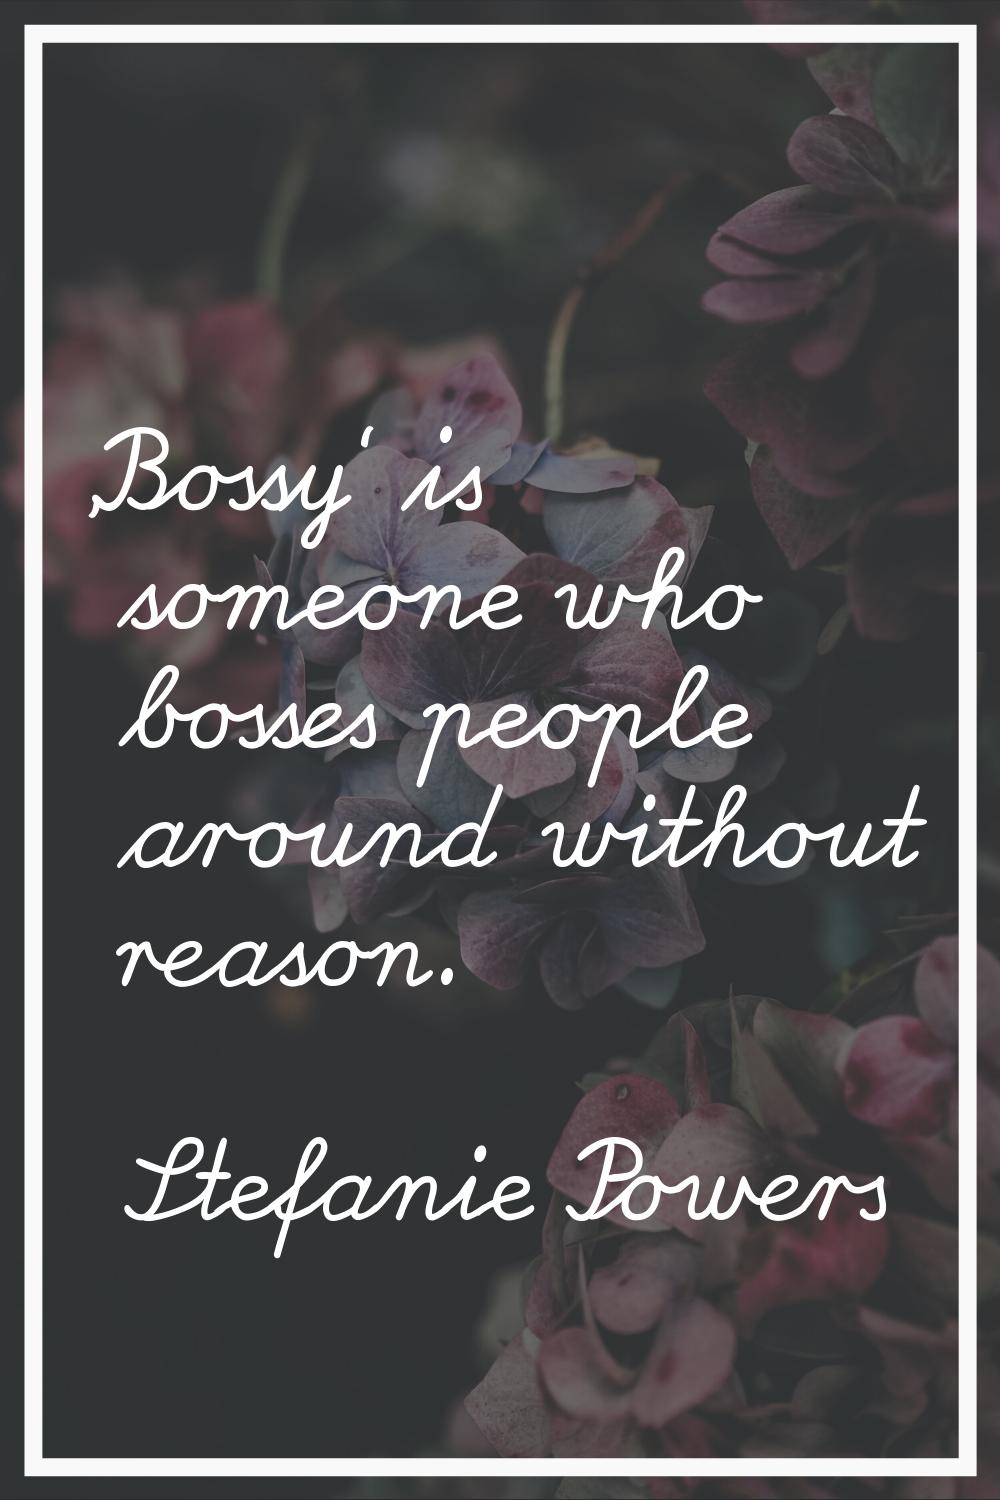 'Bossy' is someone who bosses people around without reason.